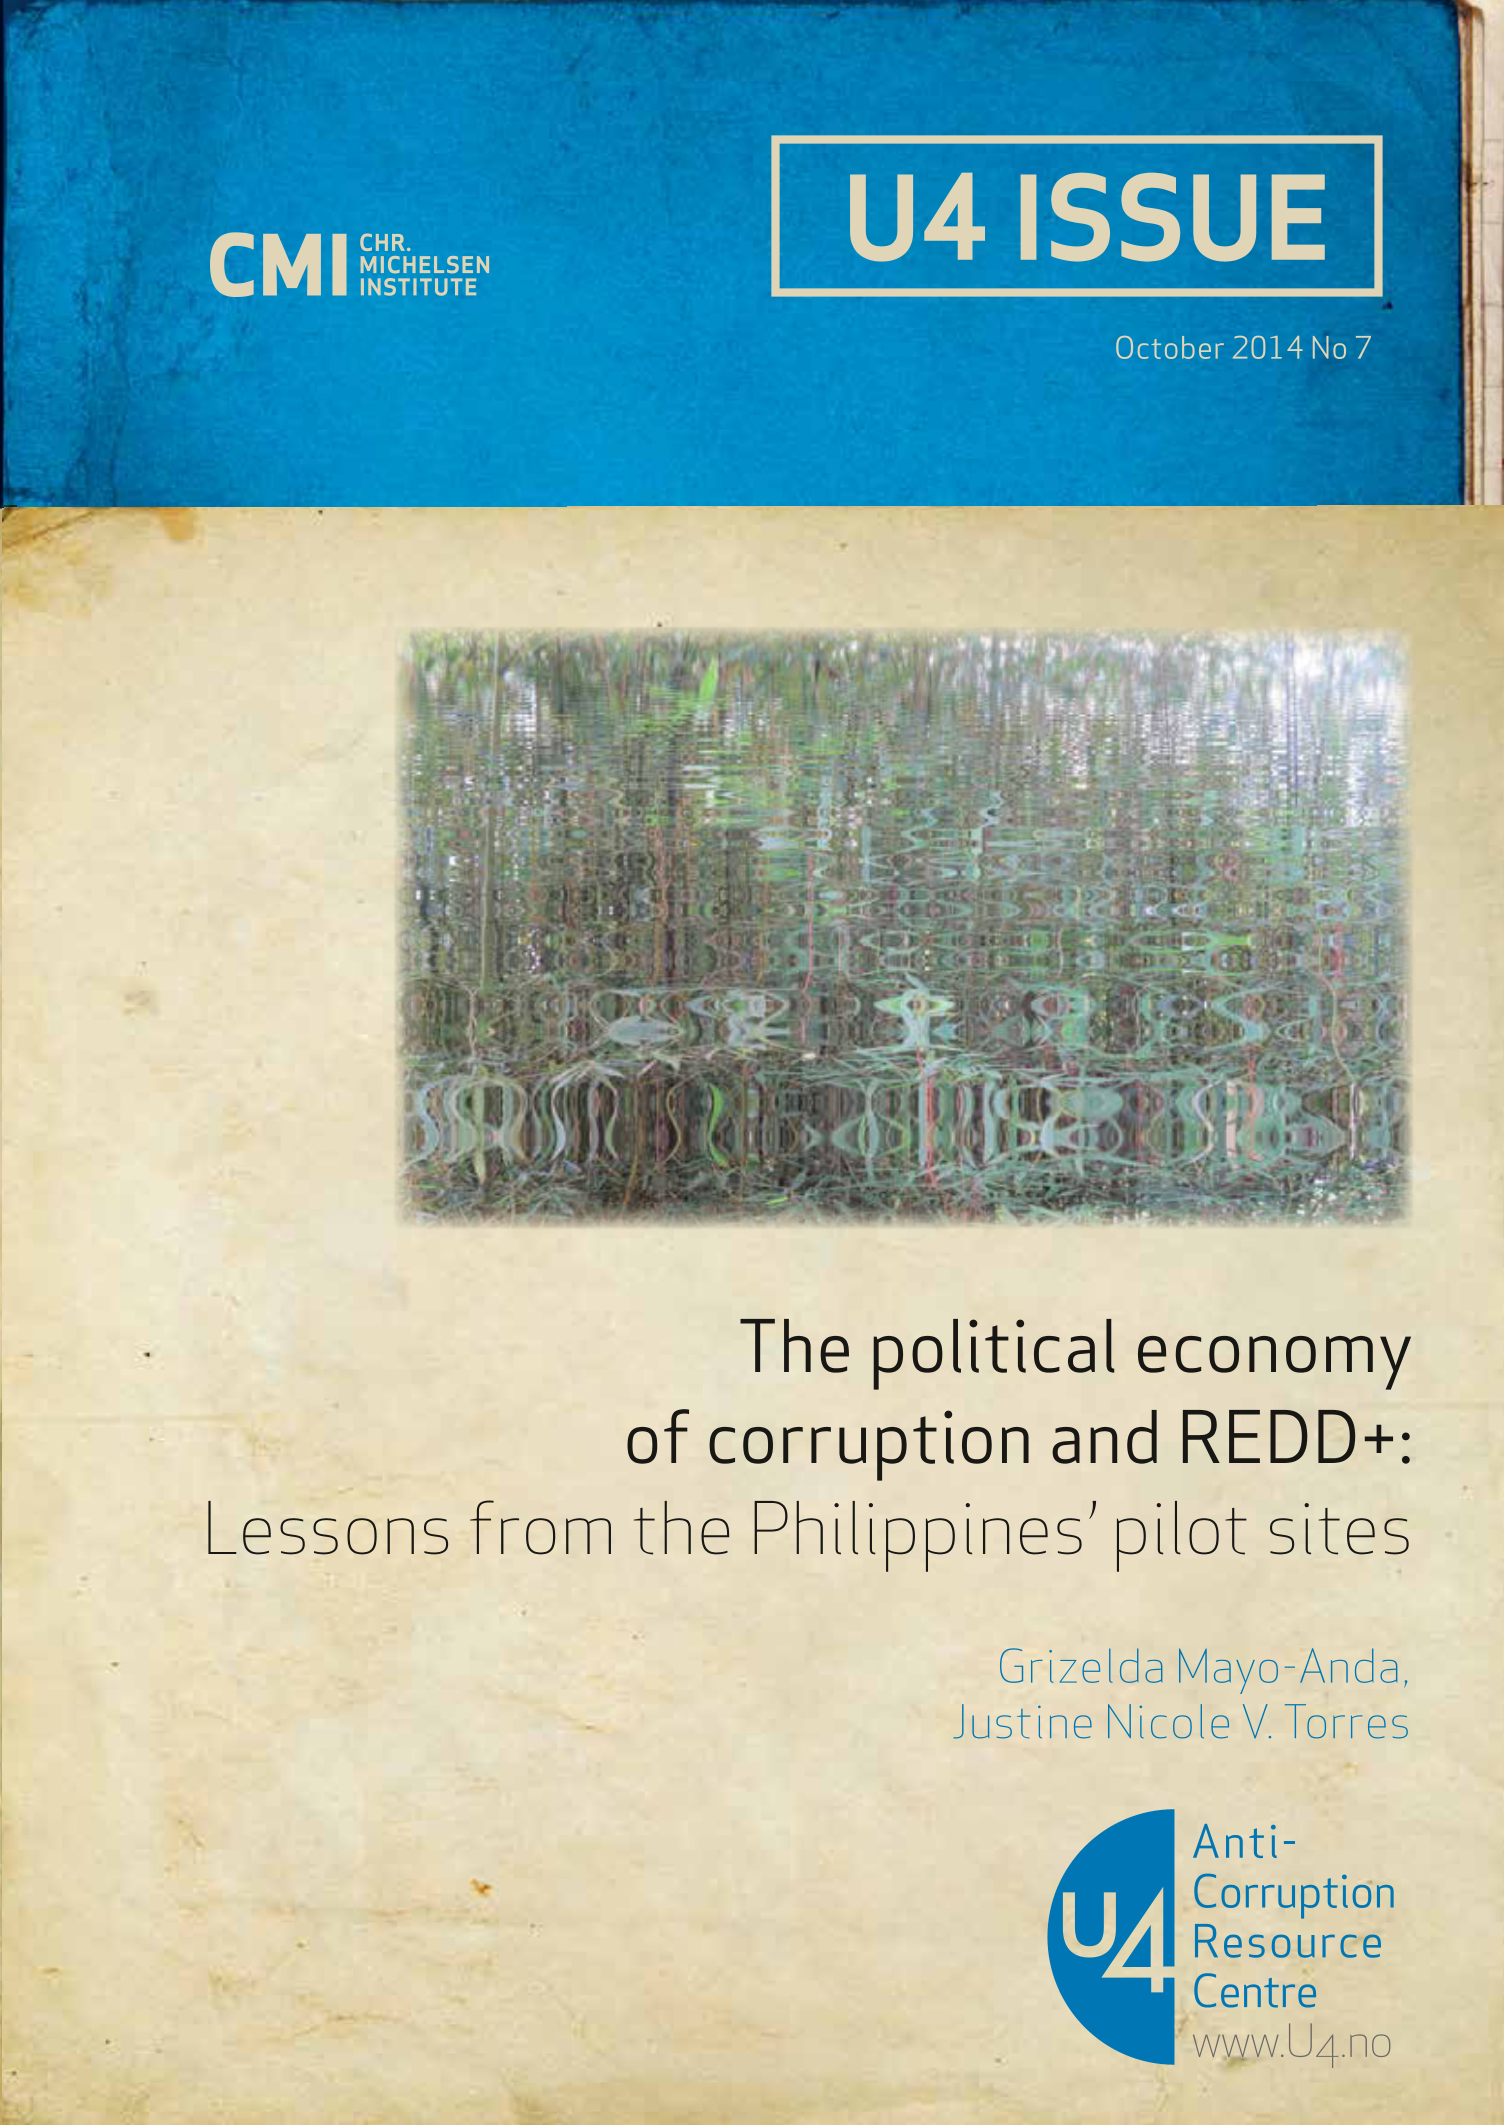 The political economy of corruption and REDD+: Lessons from the Philippines’ pilot sites